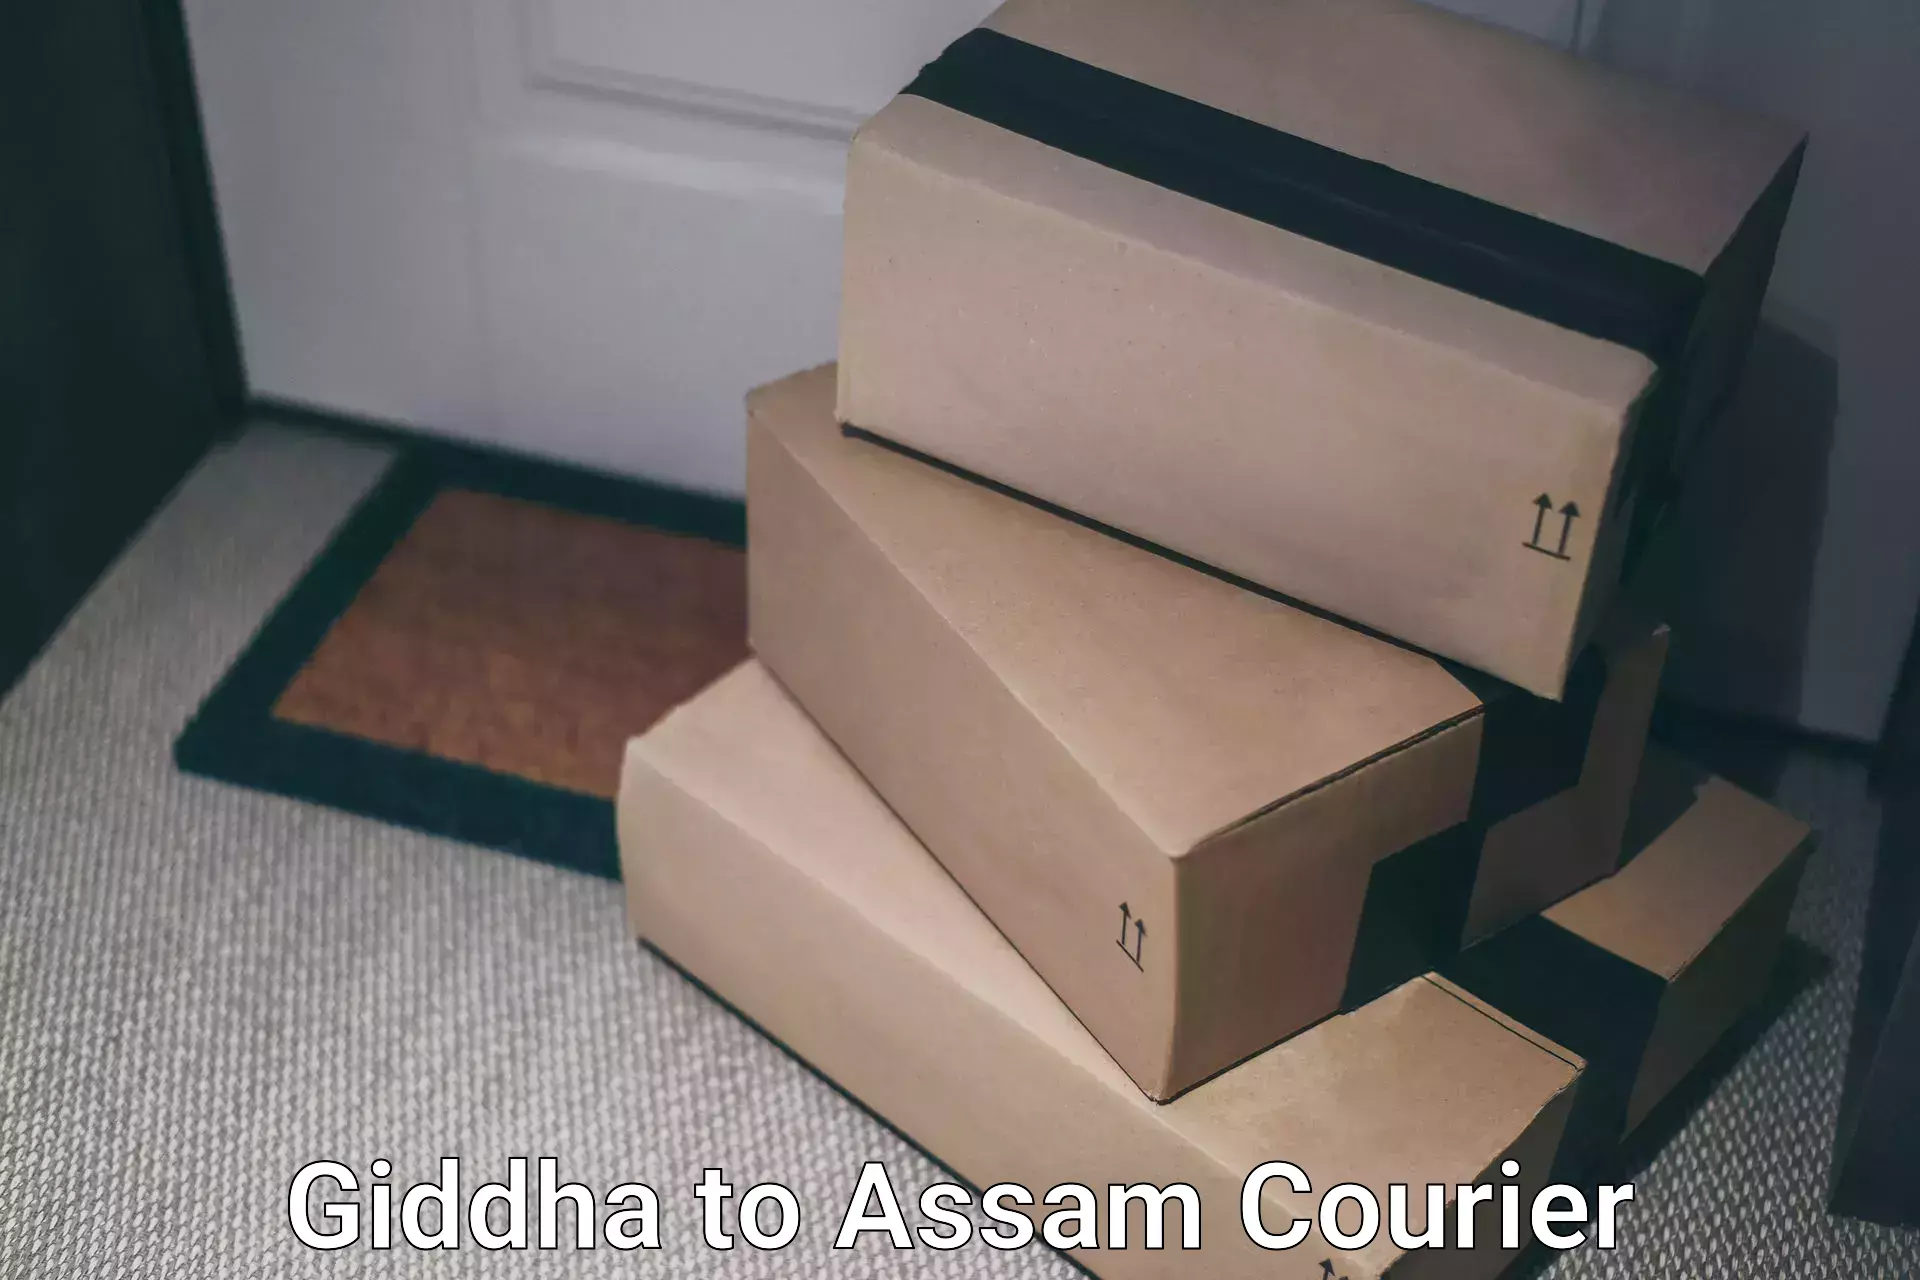 Parcel handling and care Giddha to Thelamara